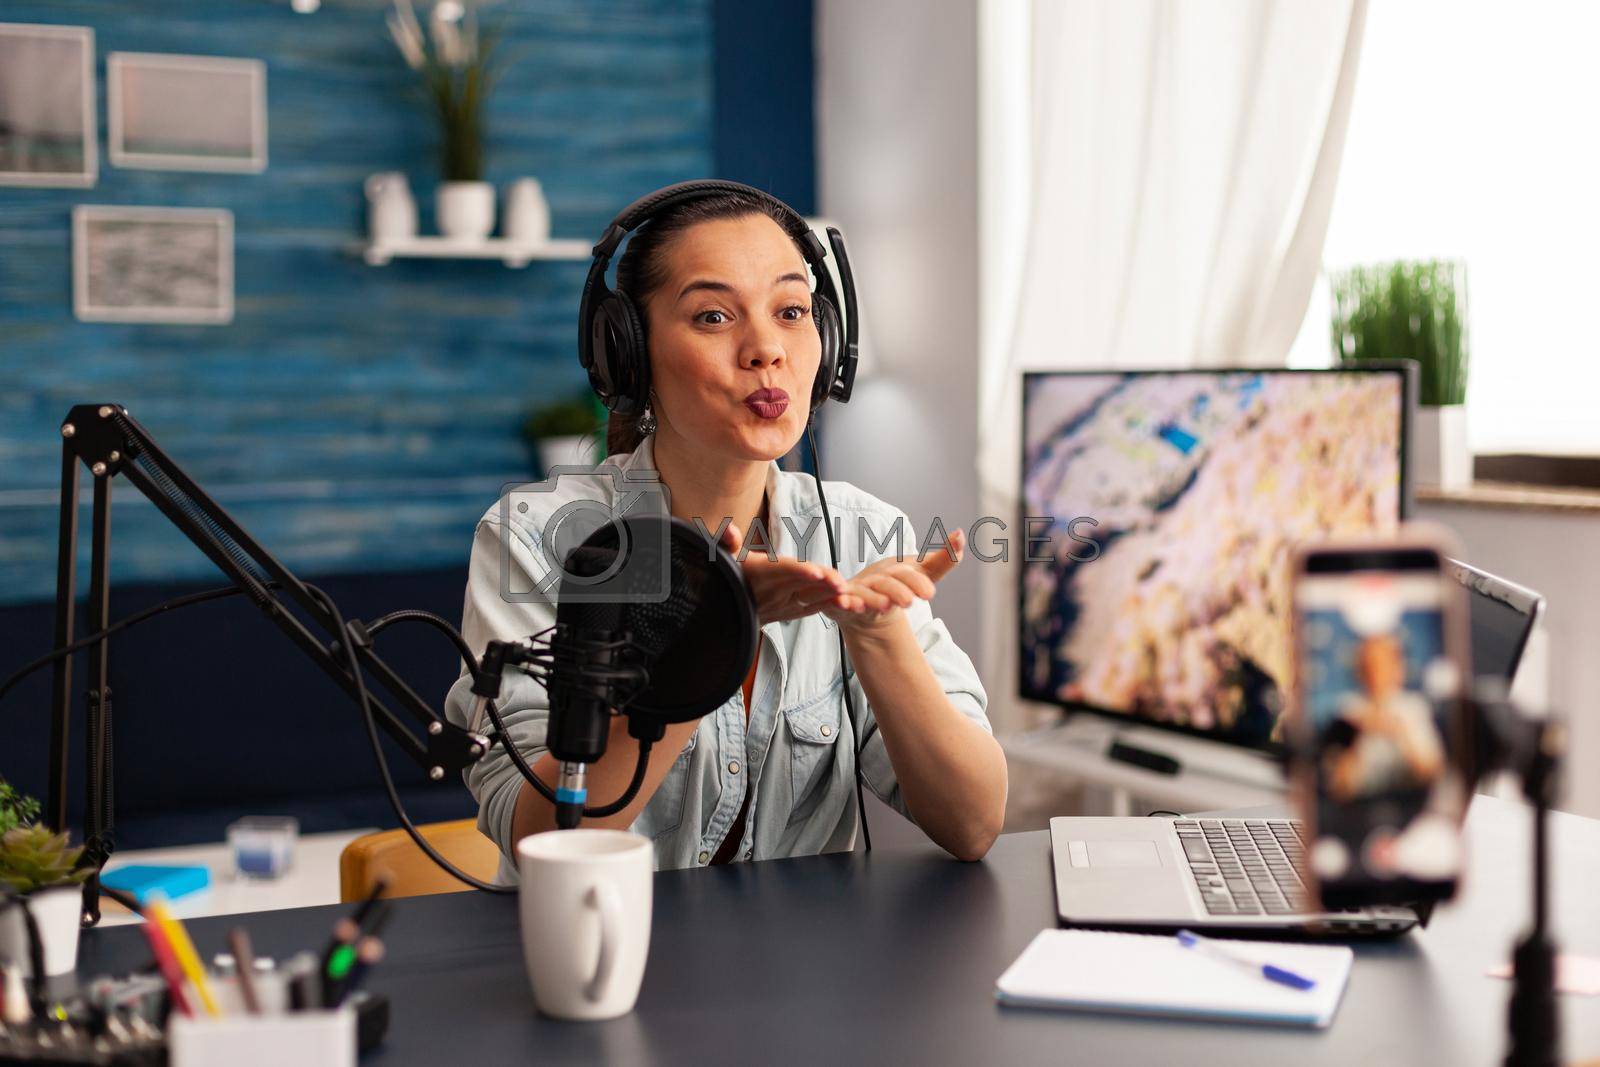 Influencer giving flying kiss while making new fashion series. Creative vlogger recording video blog concept speaking and looking at smartphone on tripod home studio podcast